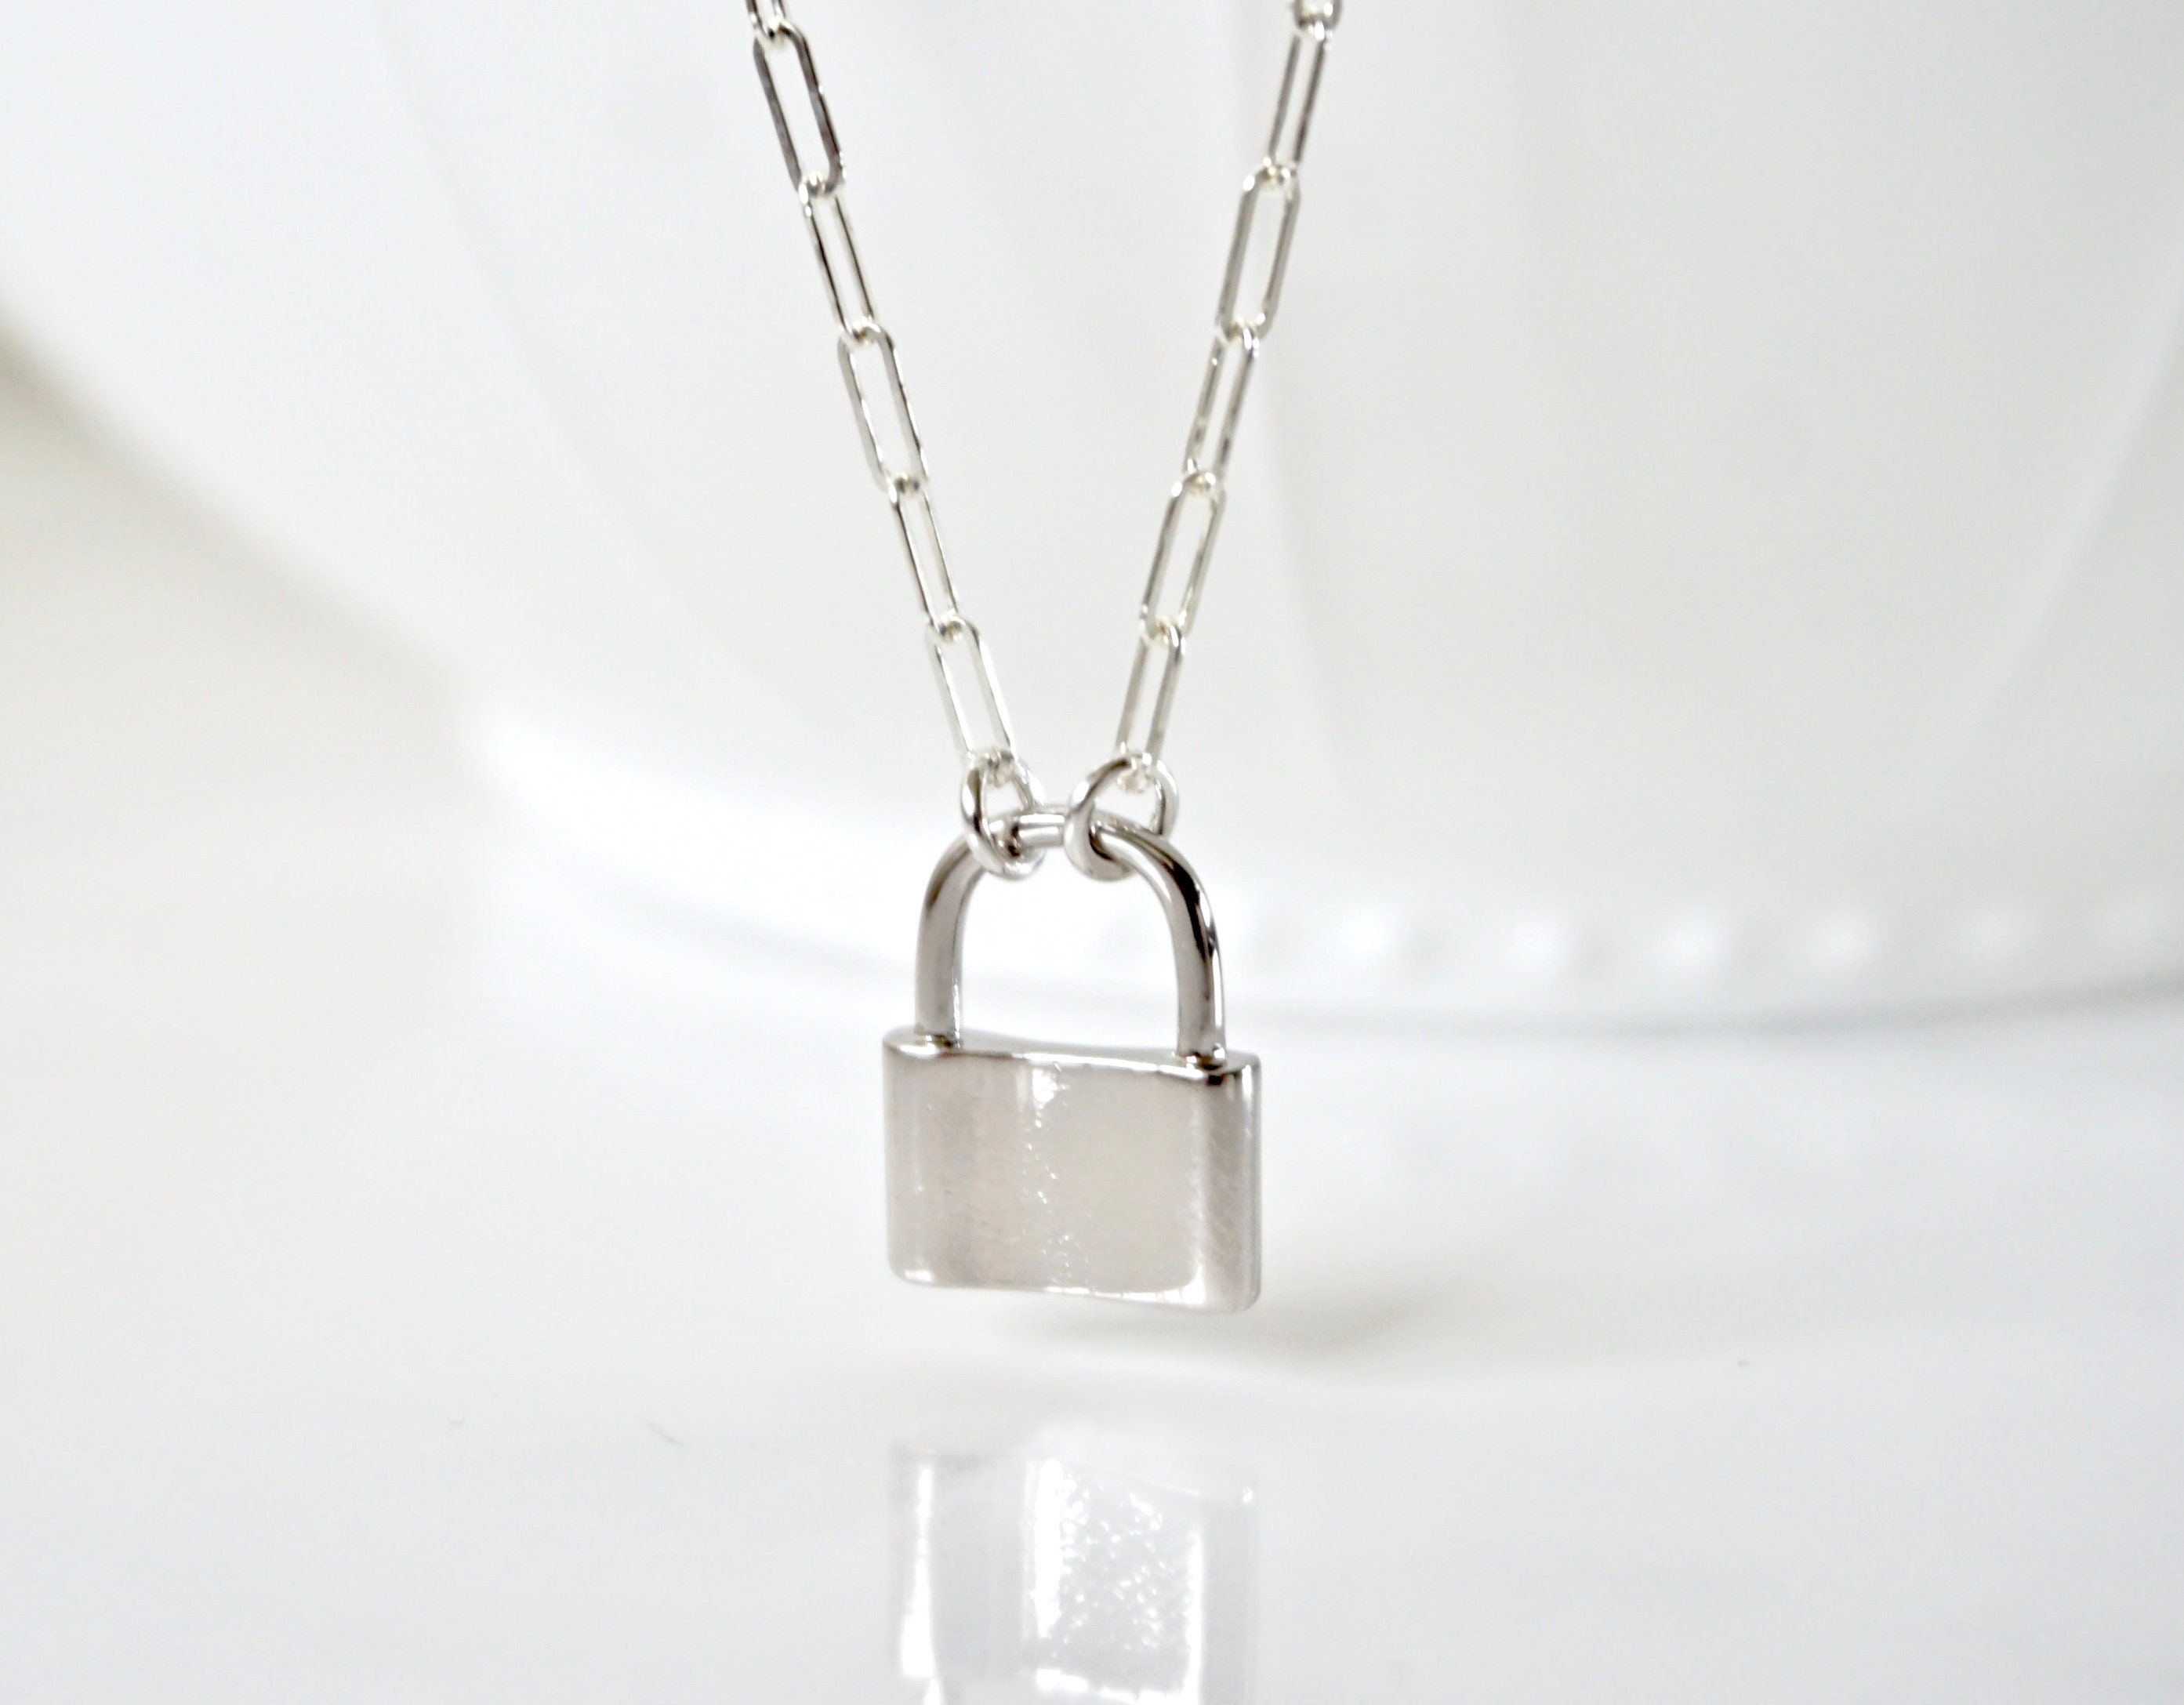 Genuine 925 Sterling Silver Mini Padlock Necklace – The Cord Gallery